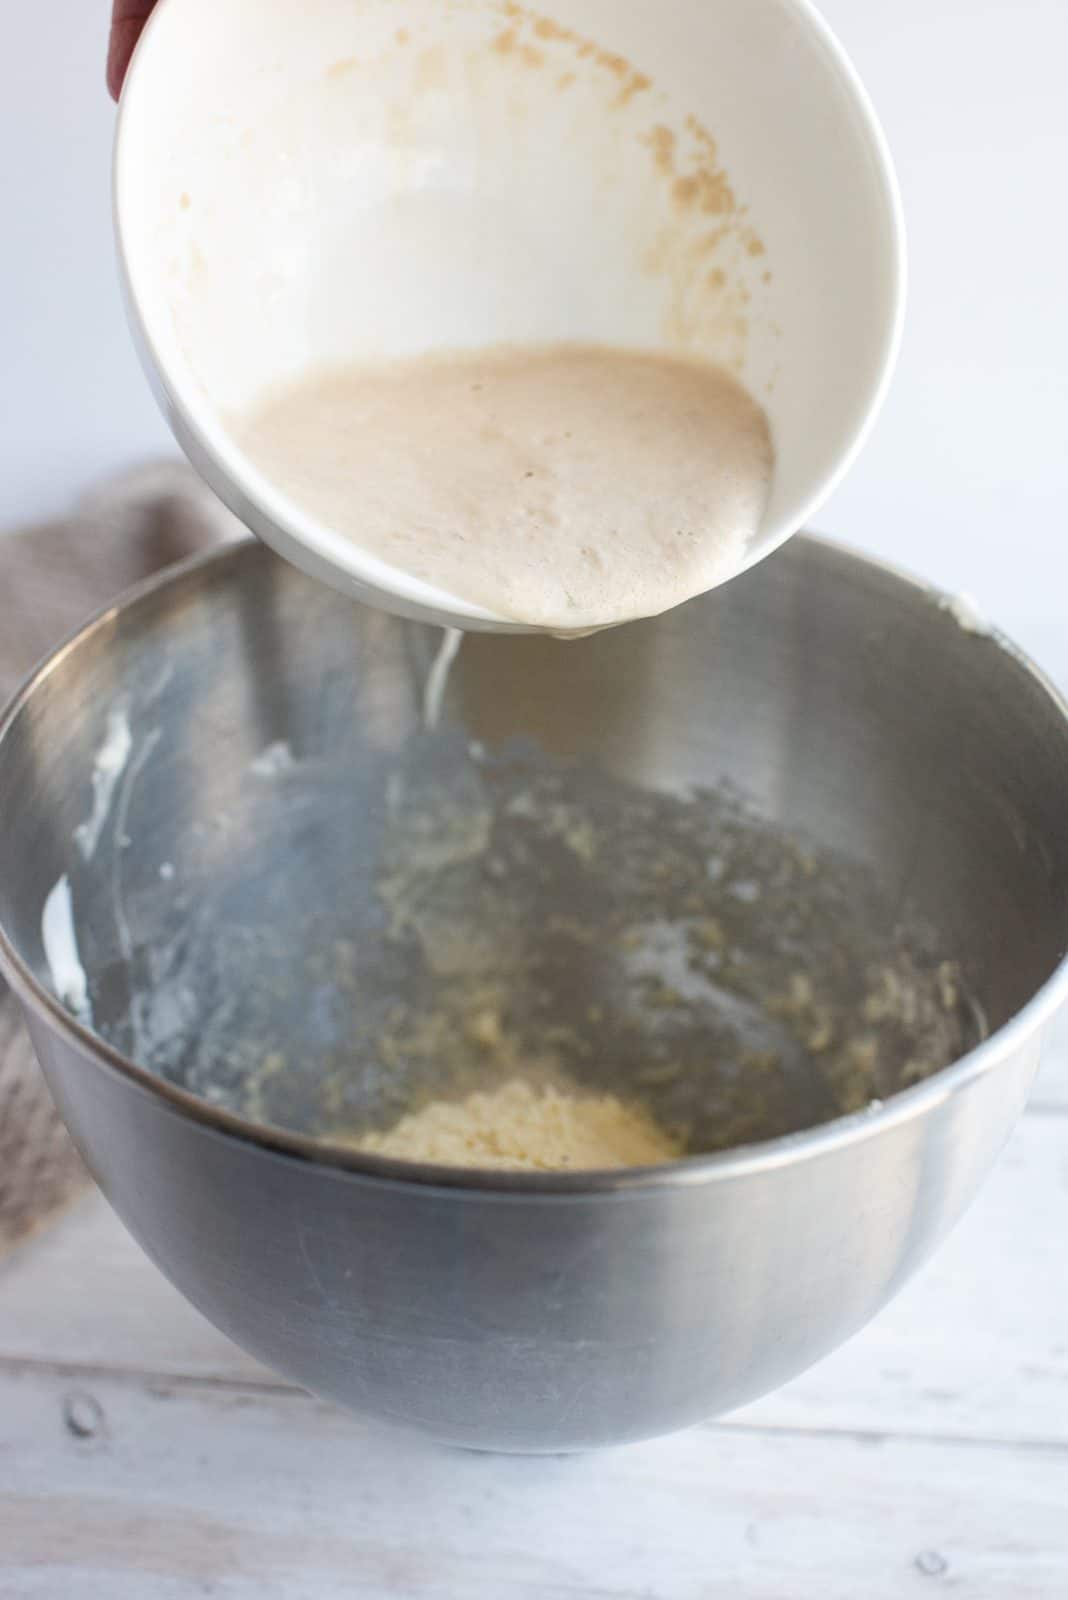 Yeast mixture being added to butter and sour cream mixture in bowl of stand mixer.